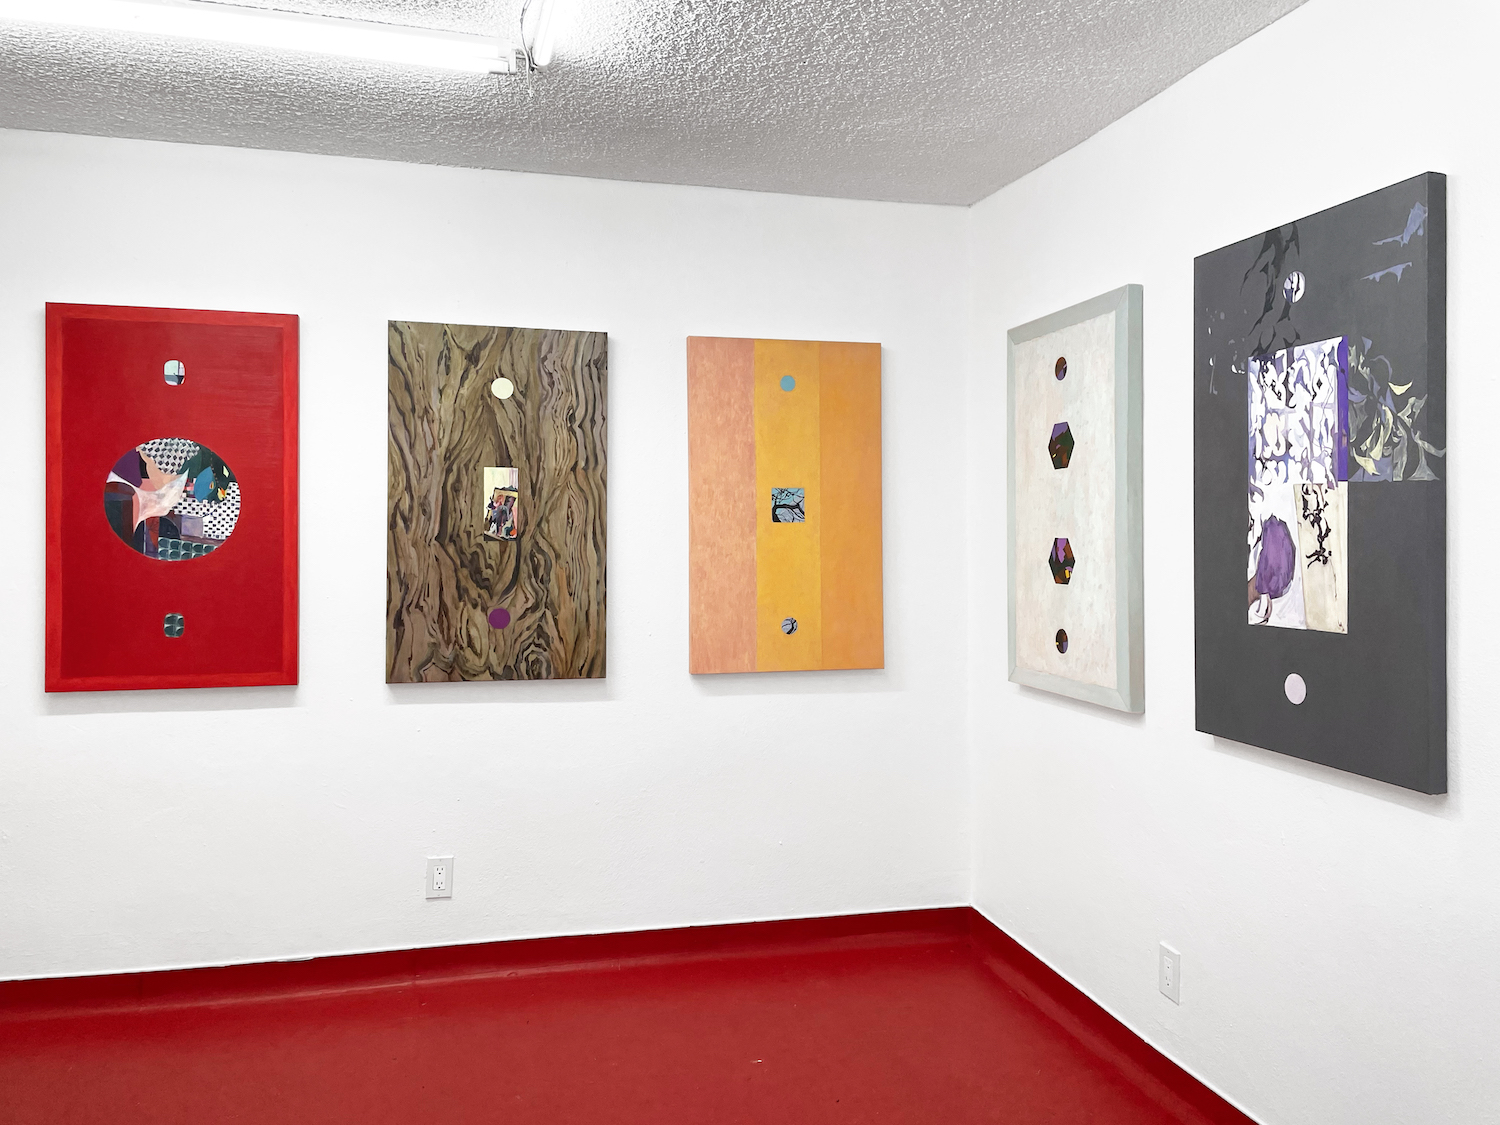 San Diego artist and founder of Two Rooms art gallery, Lizzie Zetler's new exhibit called Wall Plates showing now at Tijuana art gallery Sala de Espera